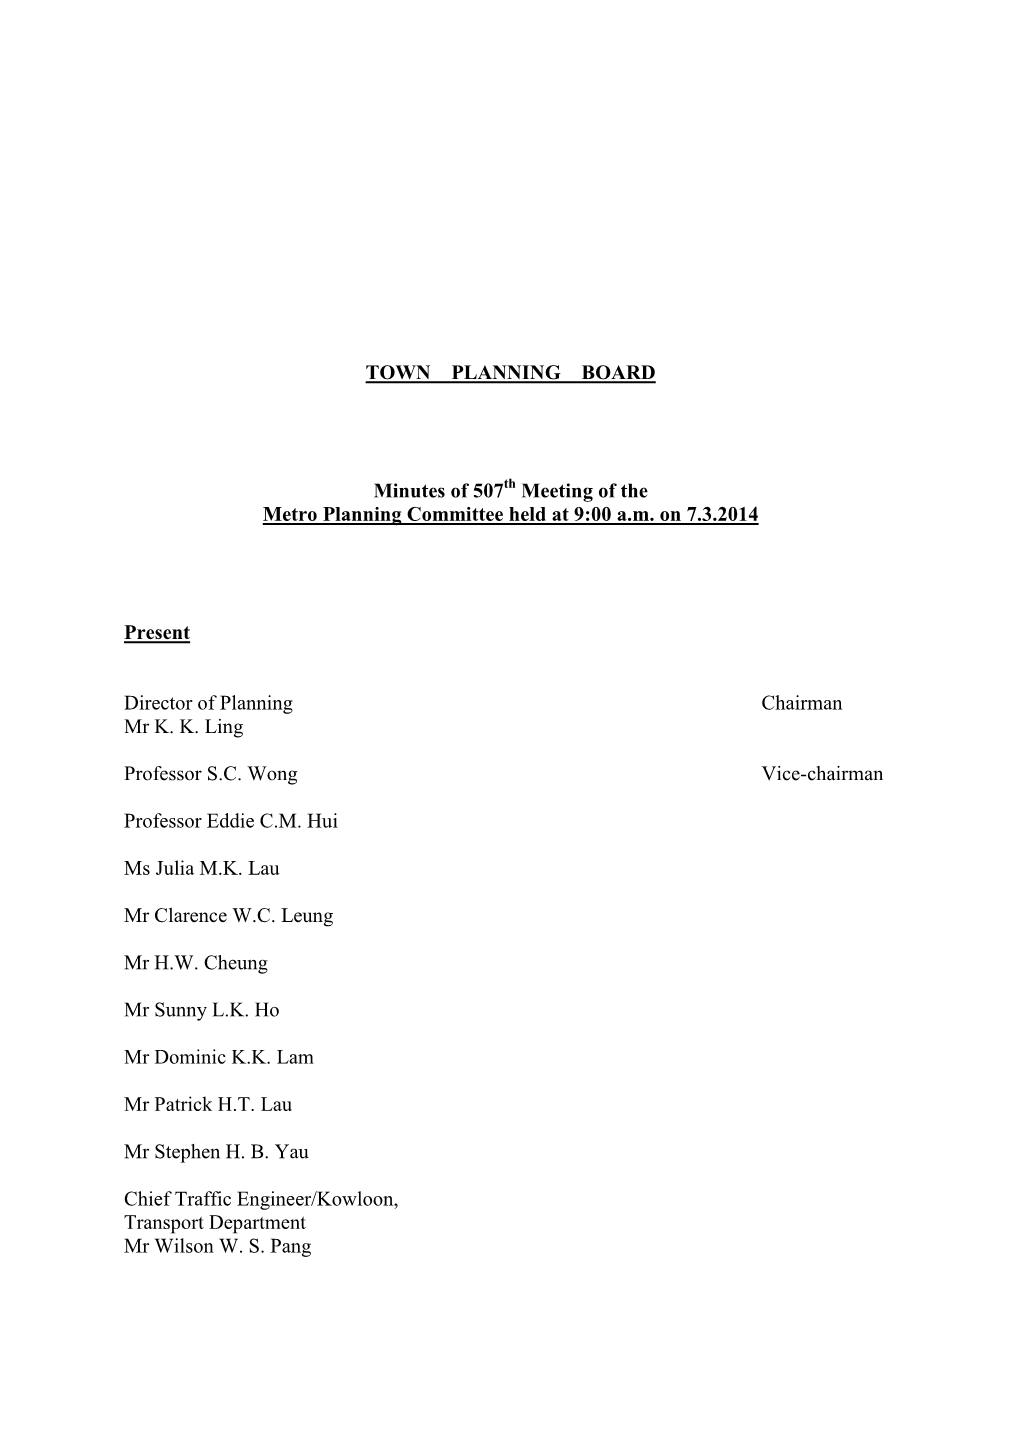 TOWN PLANNING BOARD Minutes of 507 Meeting of the Metro Planning